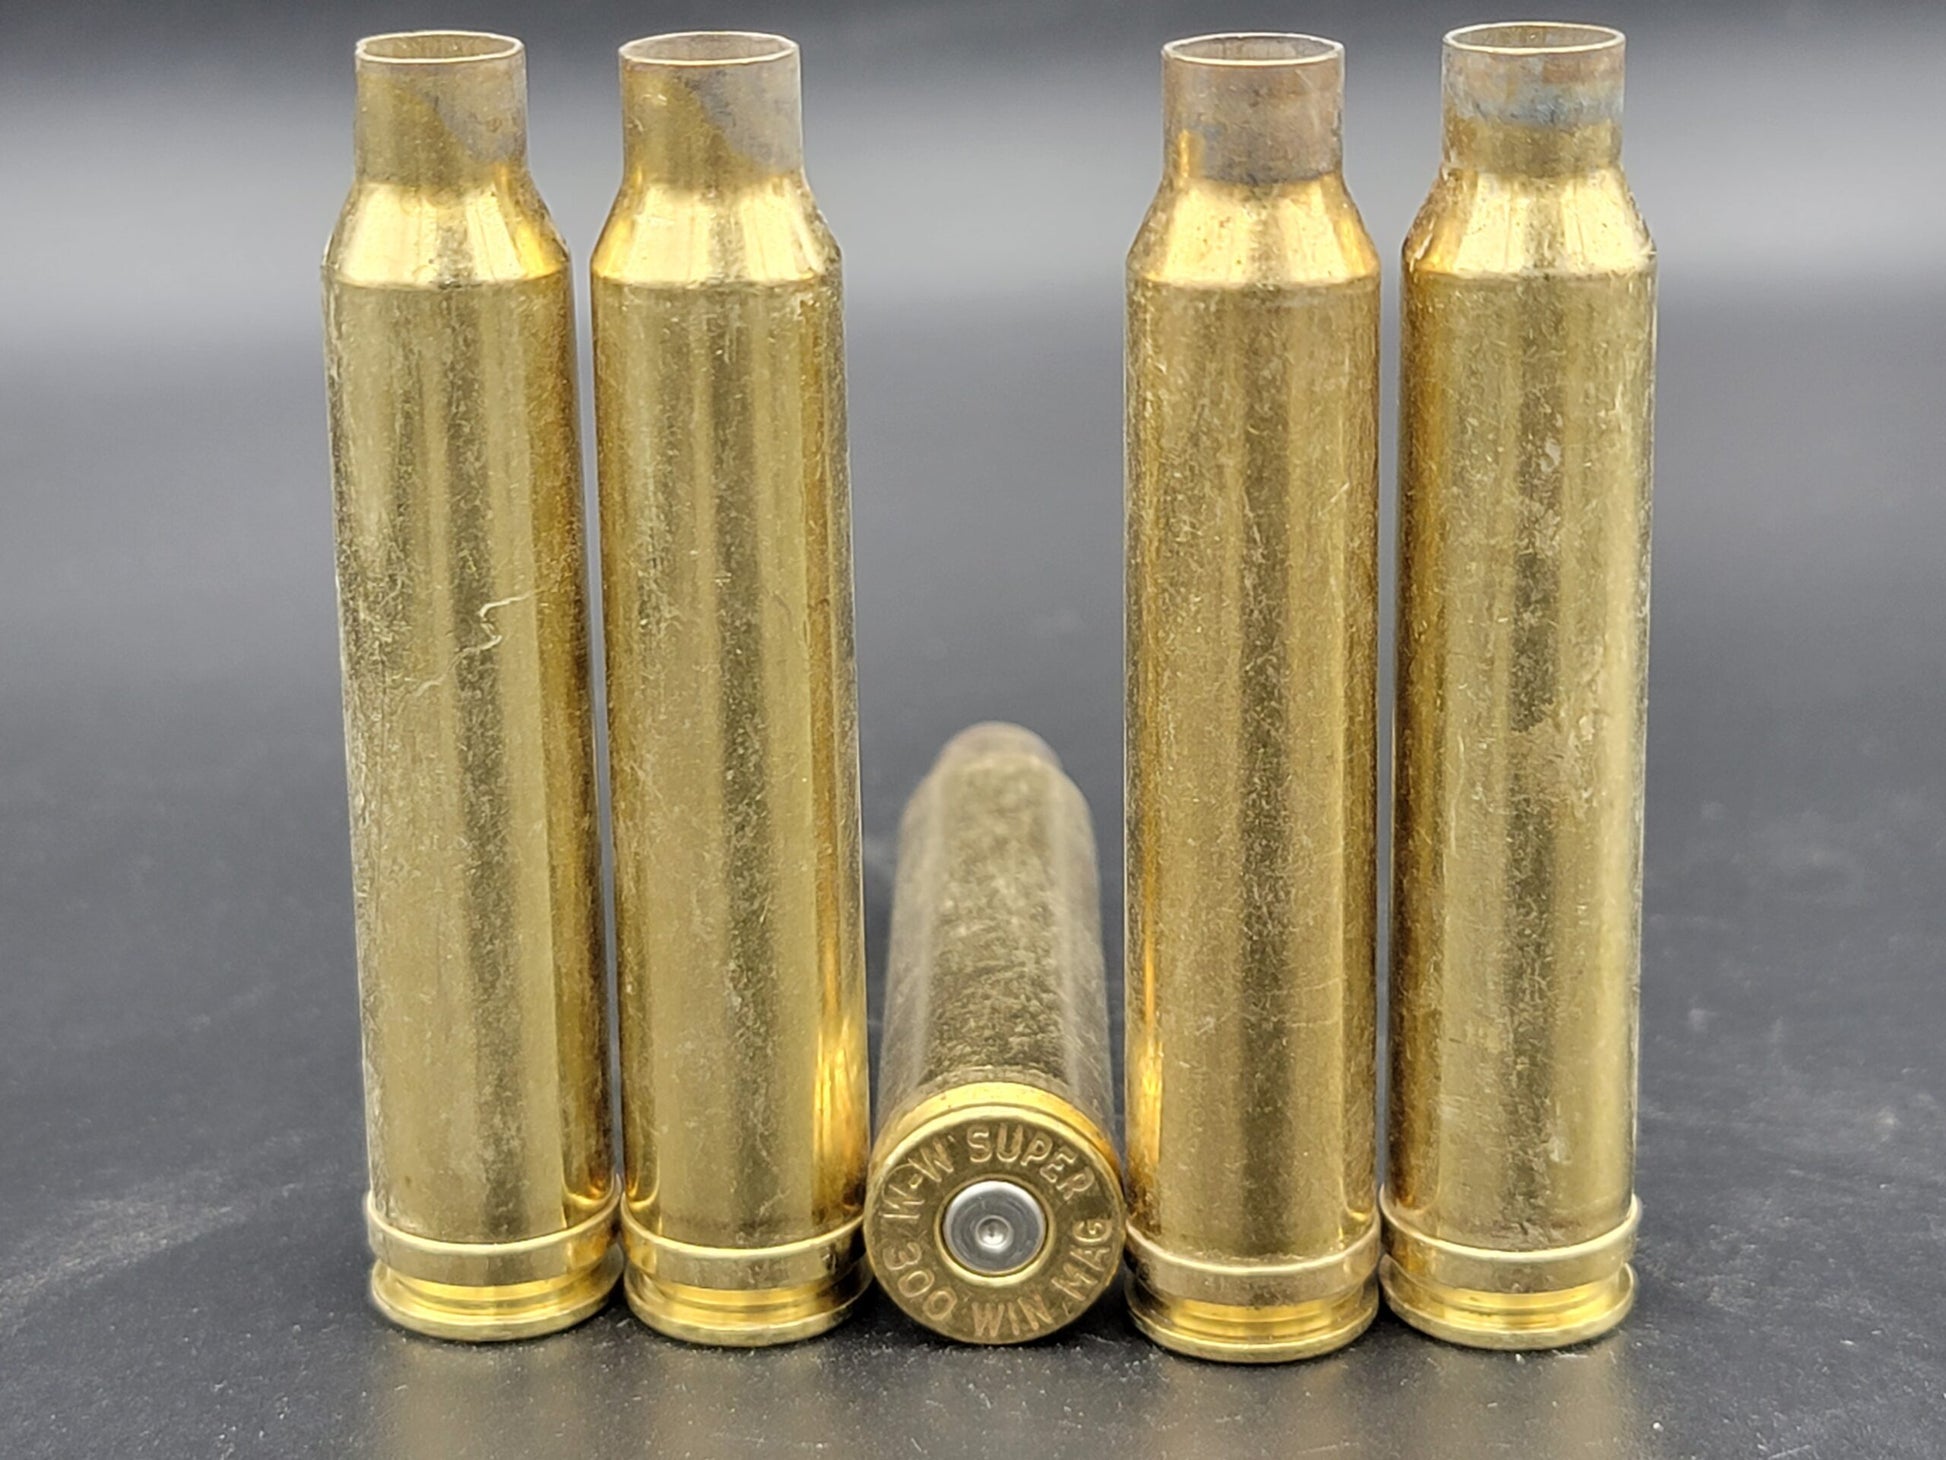 300 Win Mag once fired rifle brass. Hand sorted from reputable indoor/military ranges for reloading. Reliable spent casings for precision shooting.